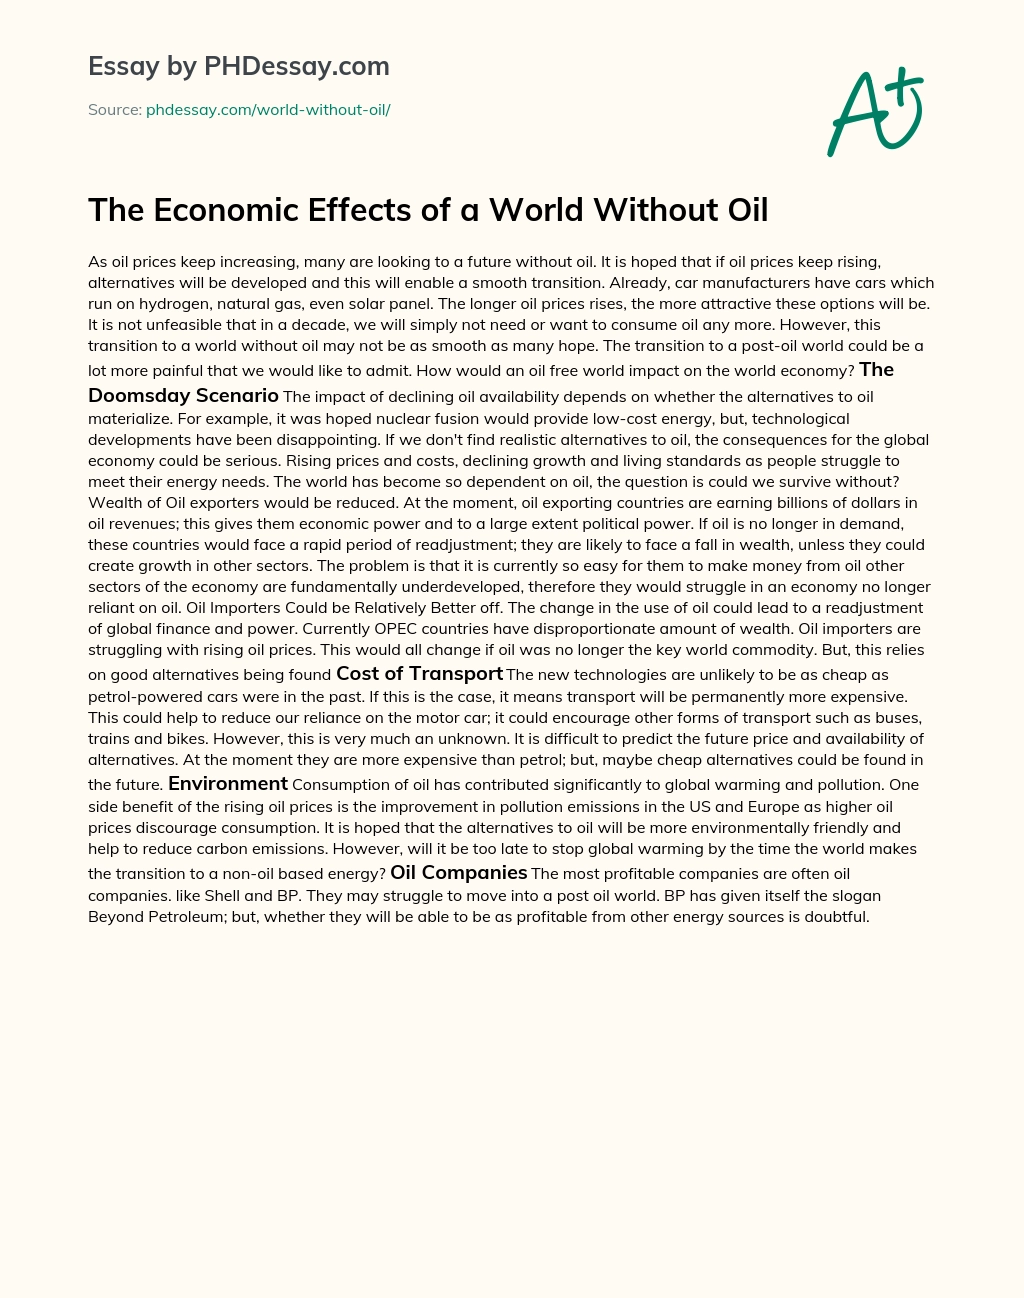 The Economic Effects of a World Without Oil essay